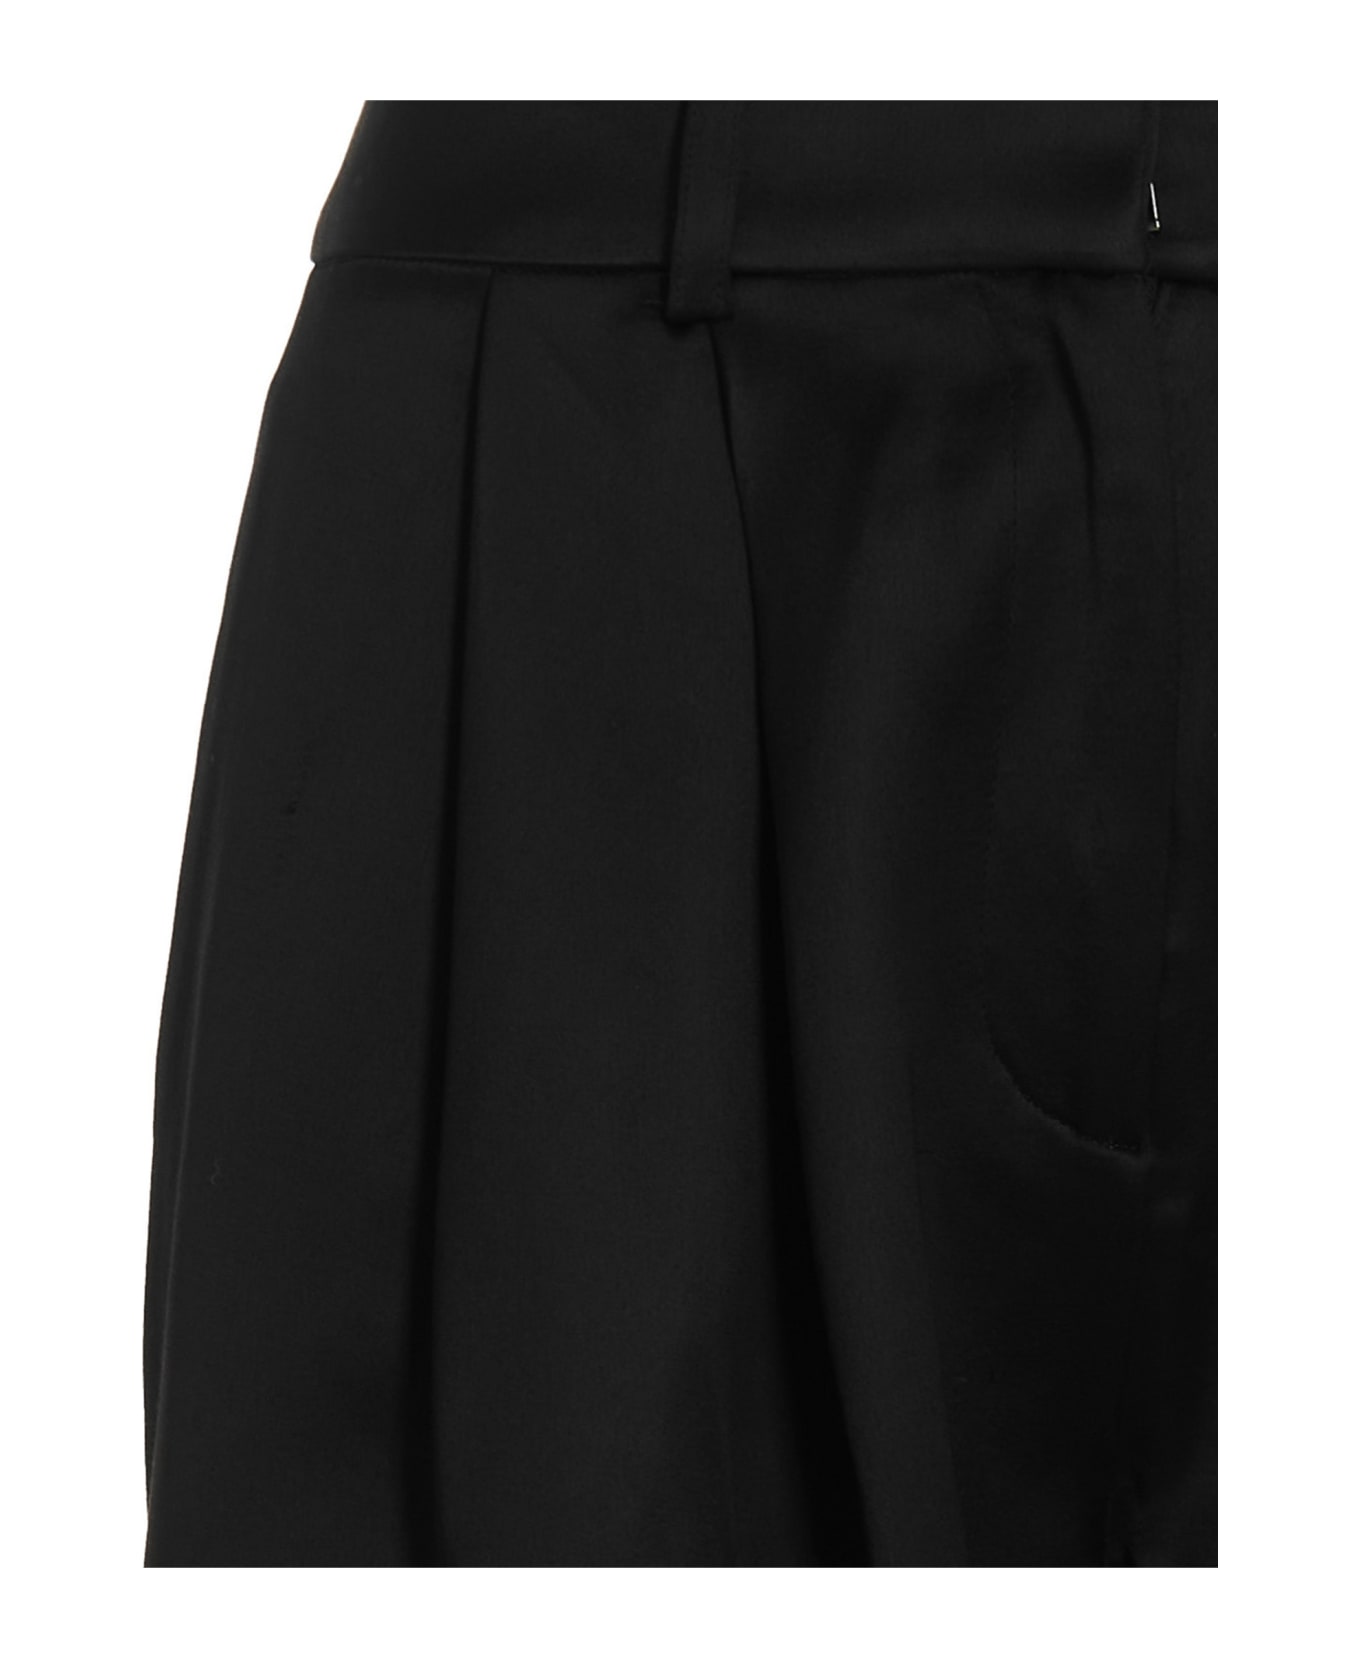 Co Pants With Front Pleats - Black  